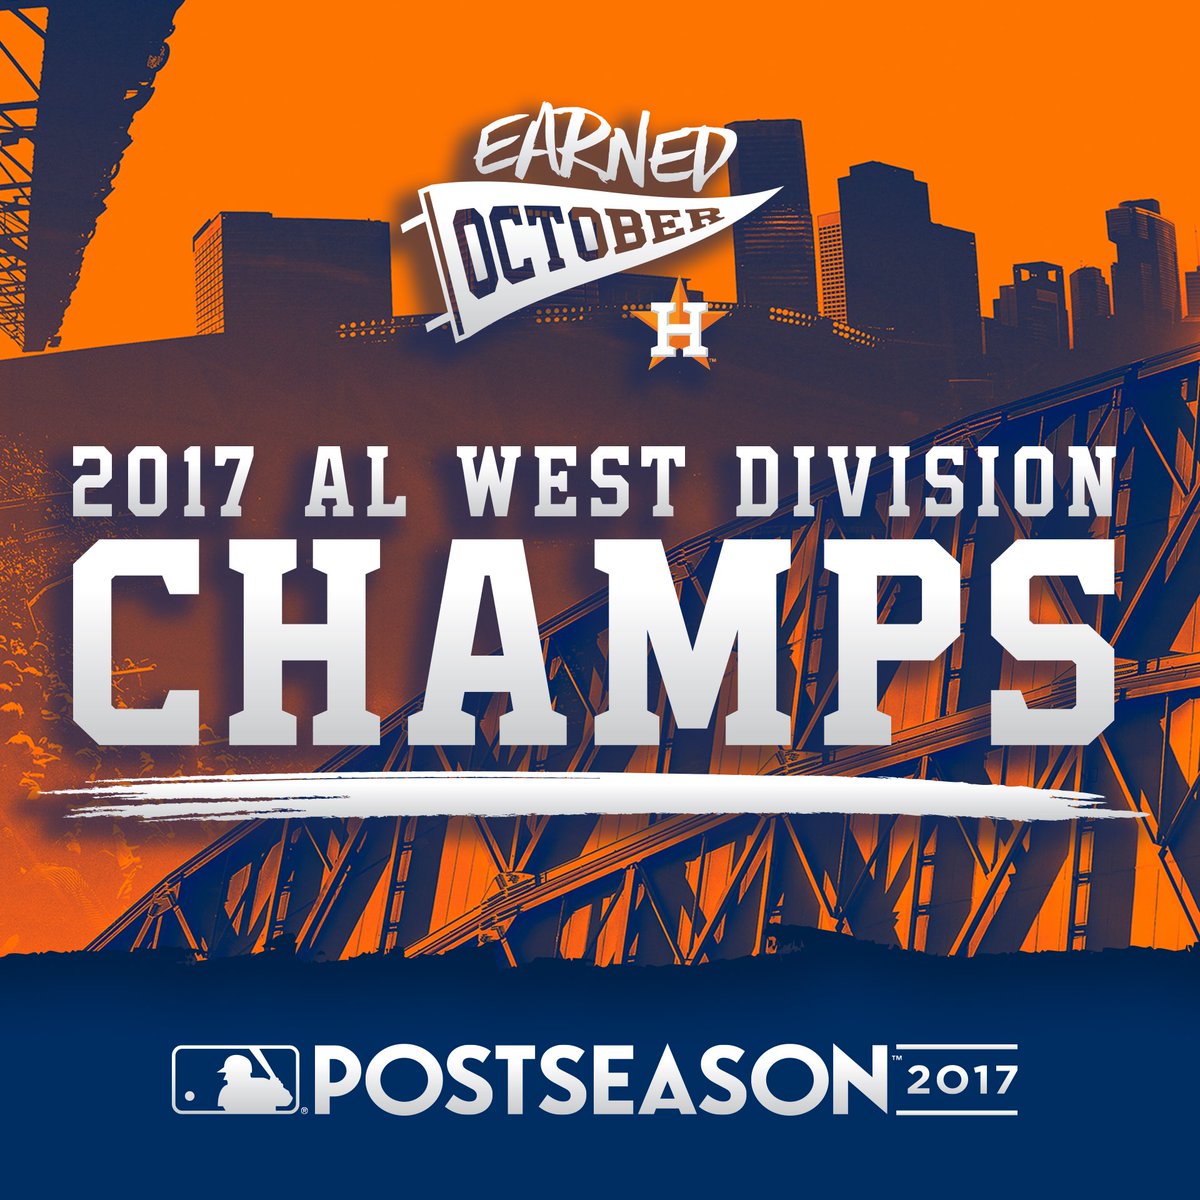 Houston Astros on X: THE WEST IS WON! #Astros are AL West Champs!  #EarnedOctober  / X